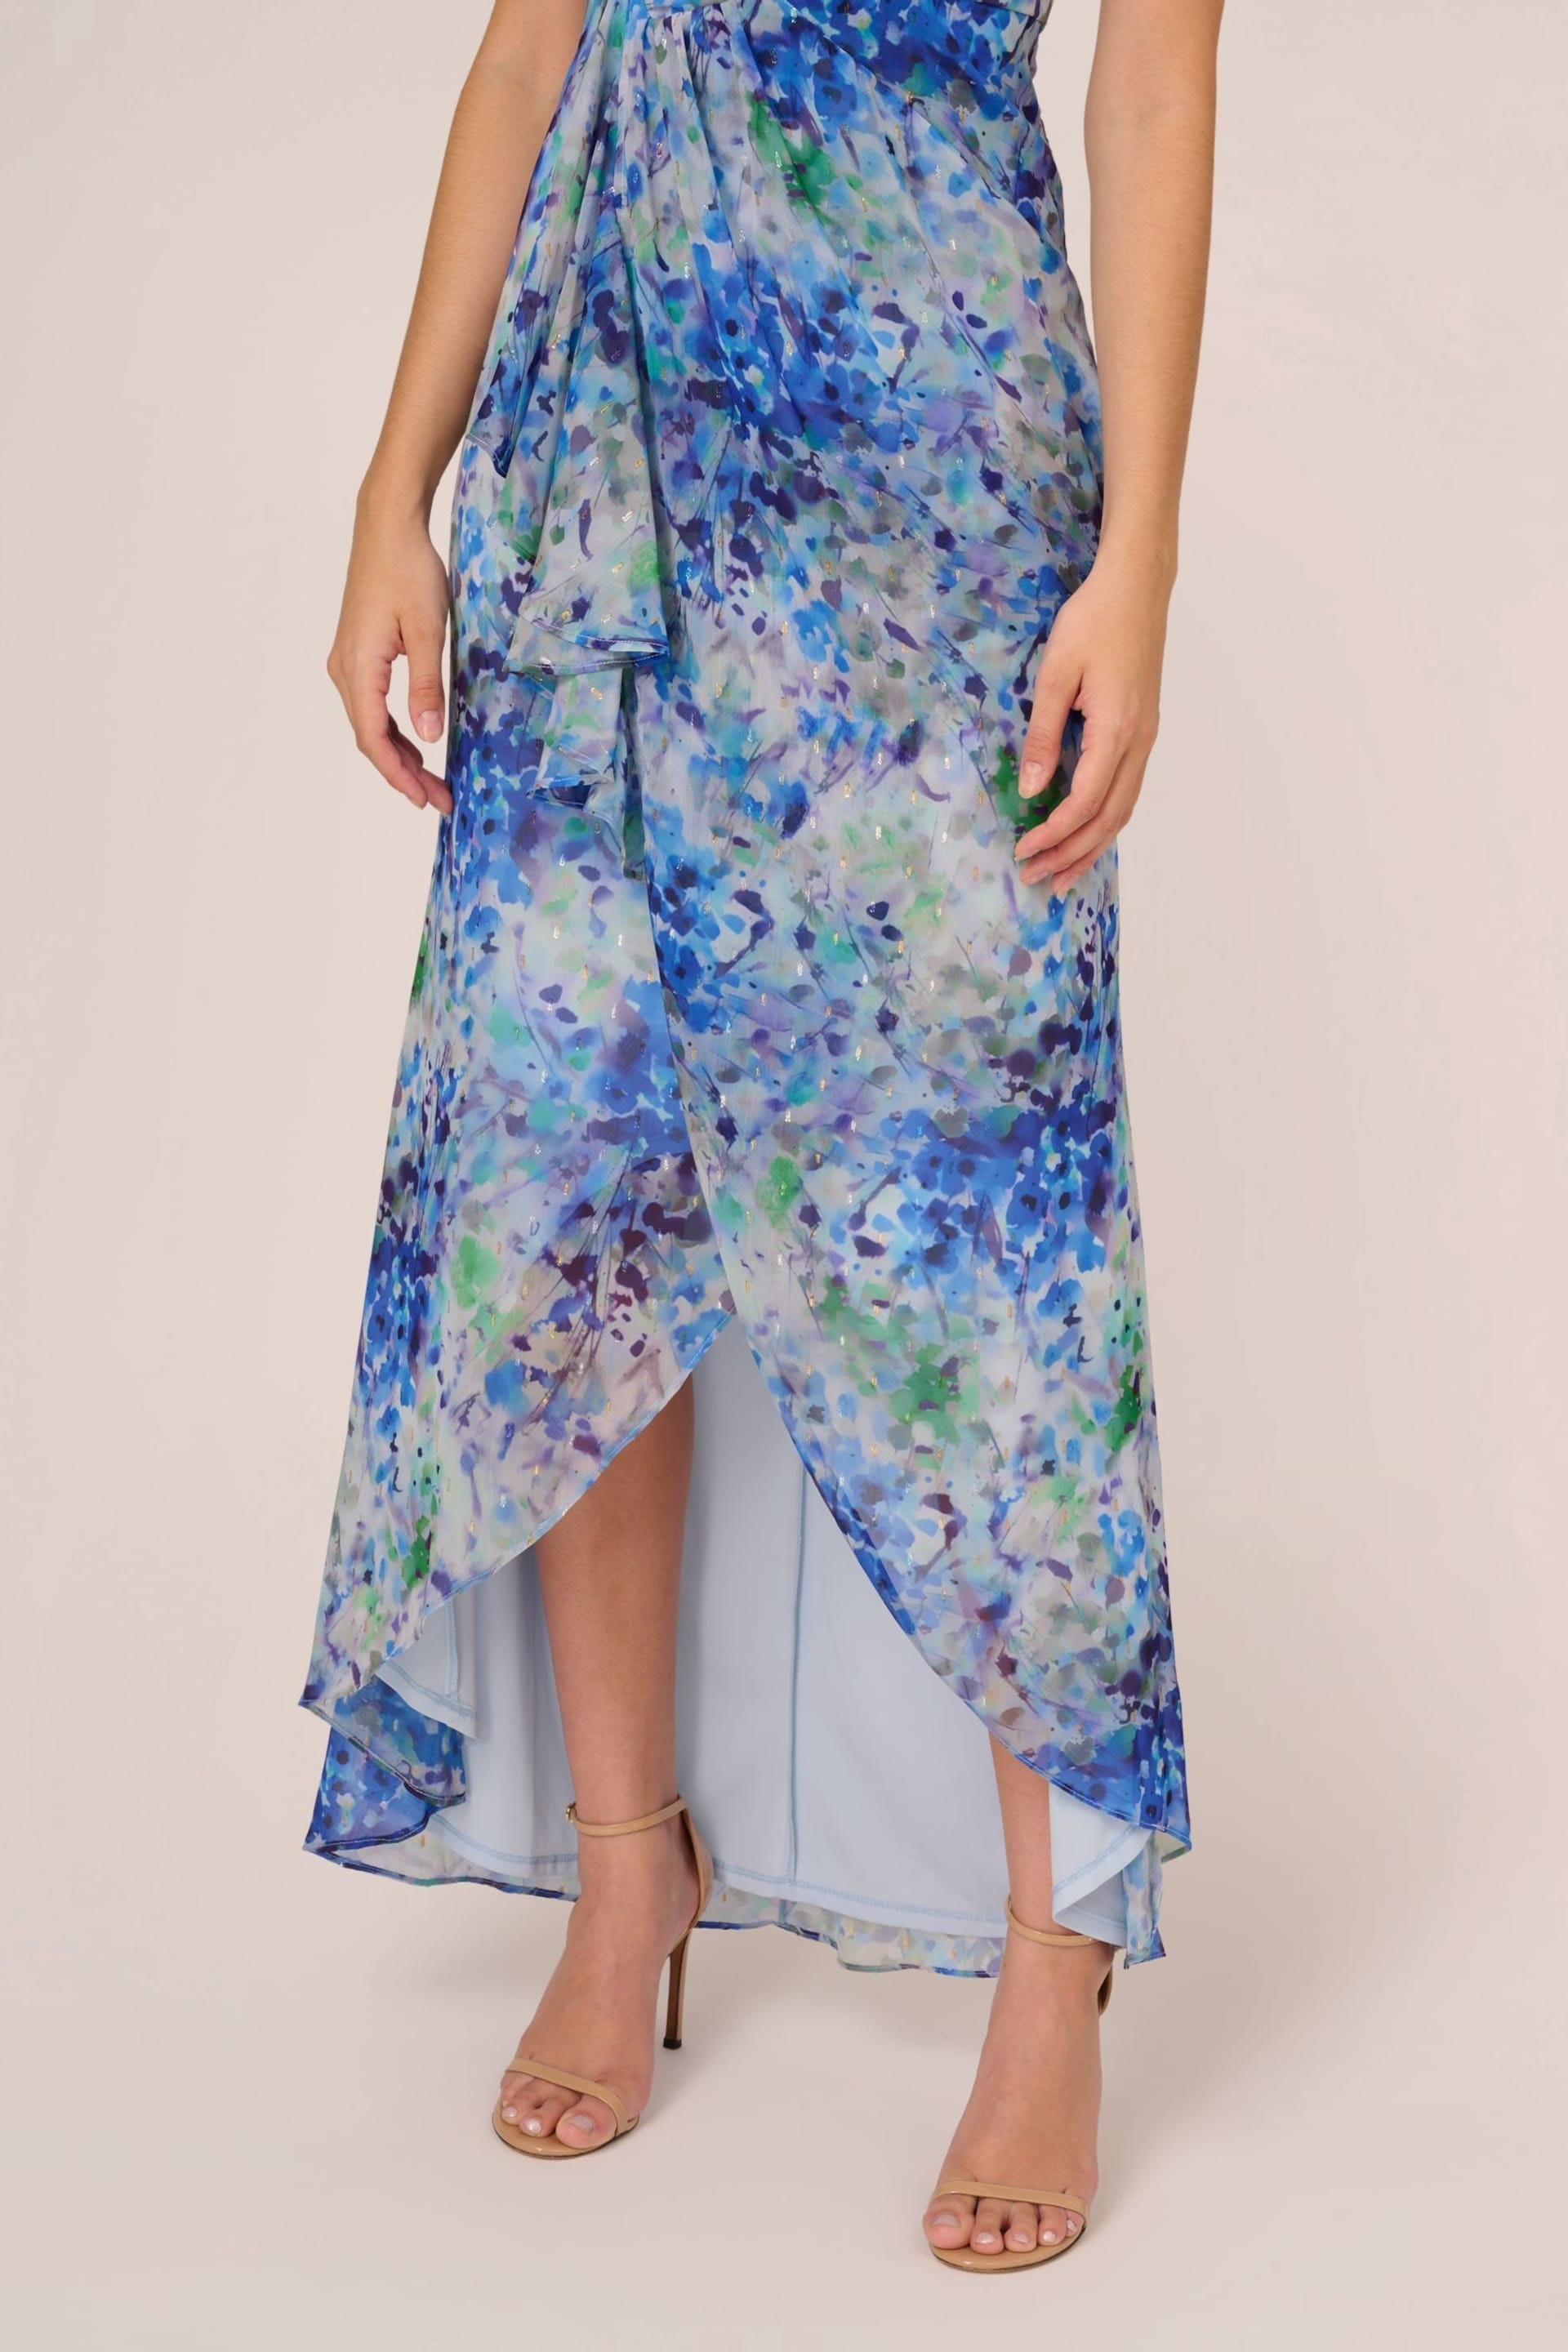 Adrianna Papell Blue Long Printed Gown - Image 4 of 7